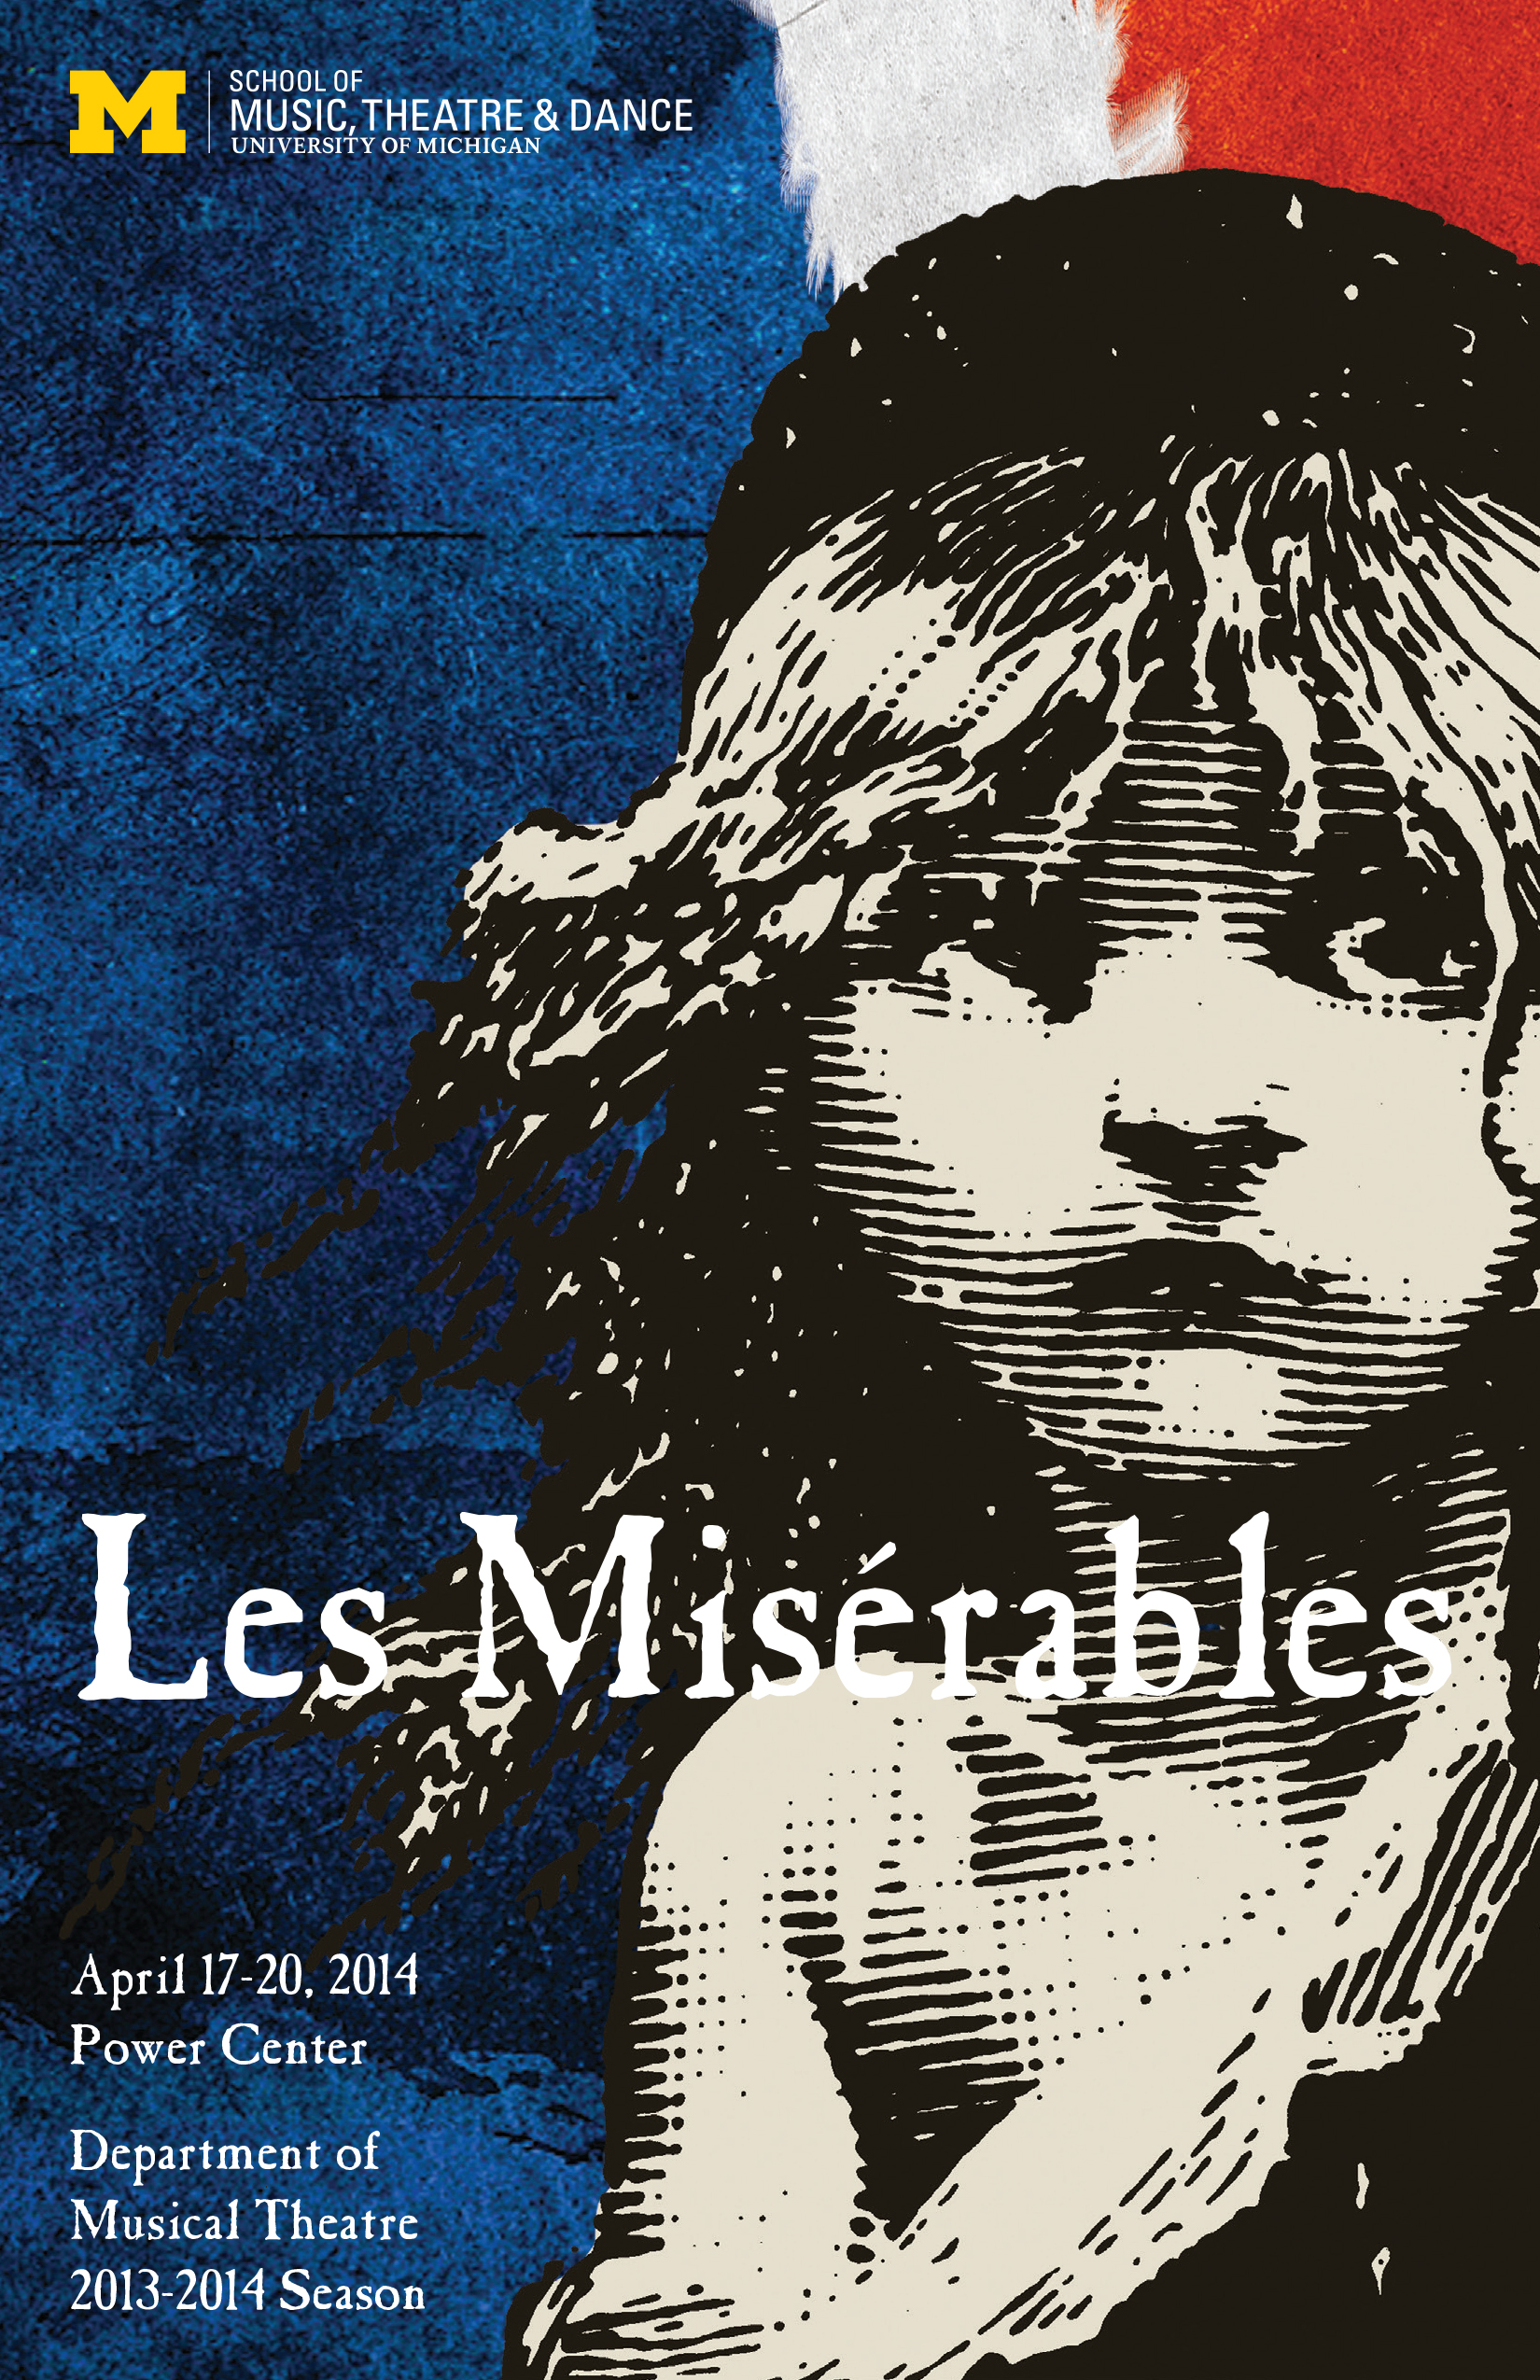 Music from Les Miserable, Show